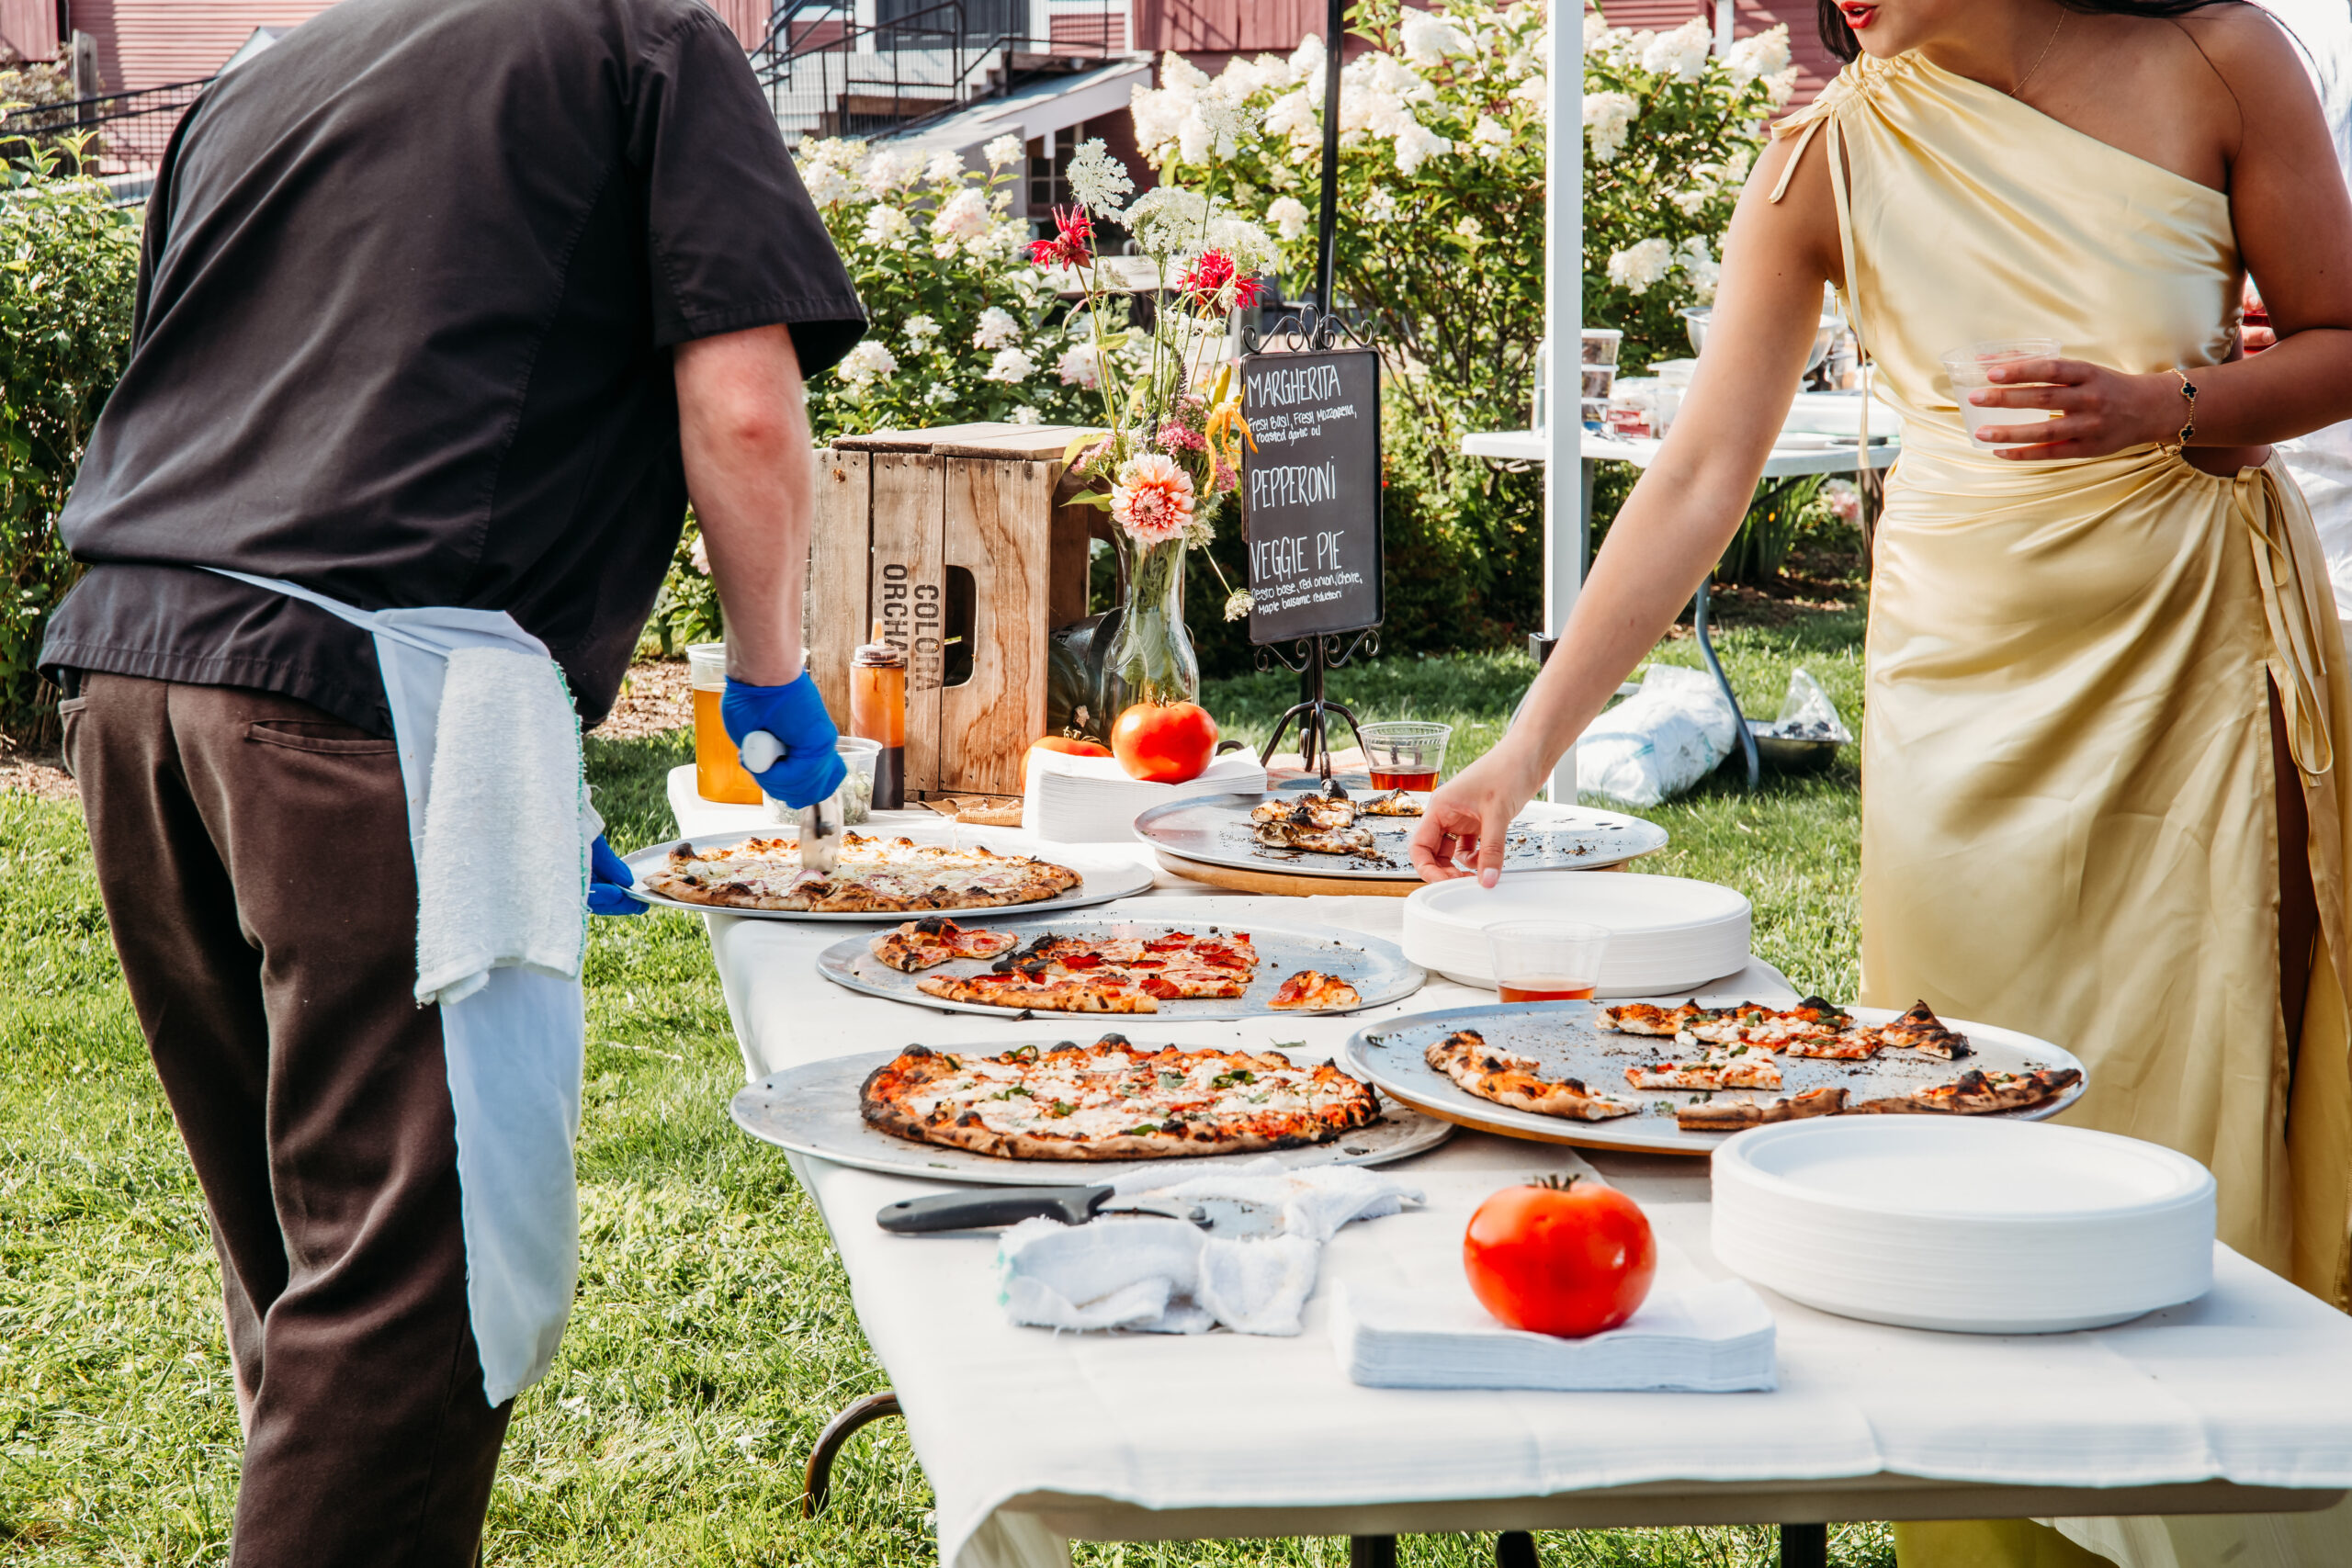 A vendor cutting up wood fired pizzas for a guest at a picnic wedding reception in Vermont.